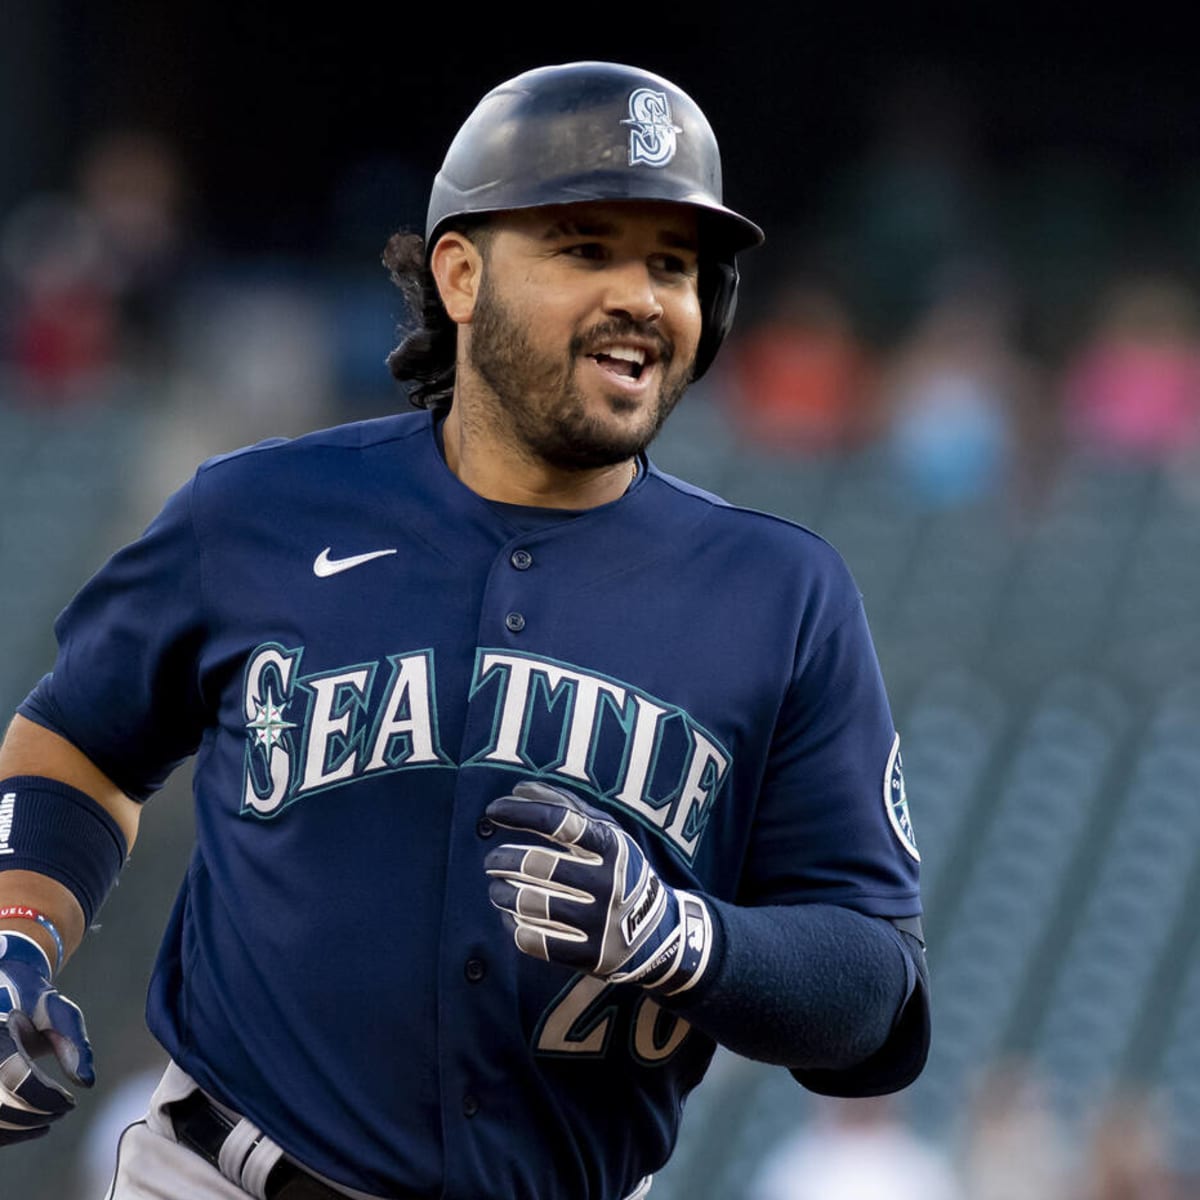 Mariners – Tigers: Eugenio Suarez played soccer with foul ball